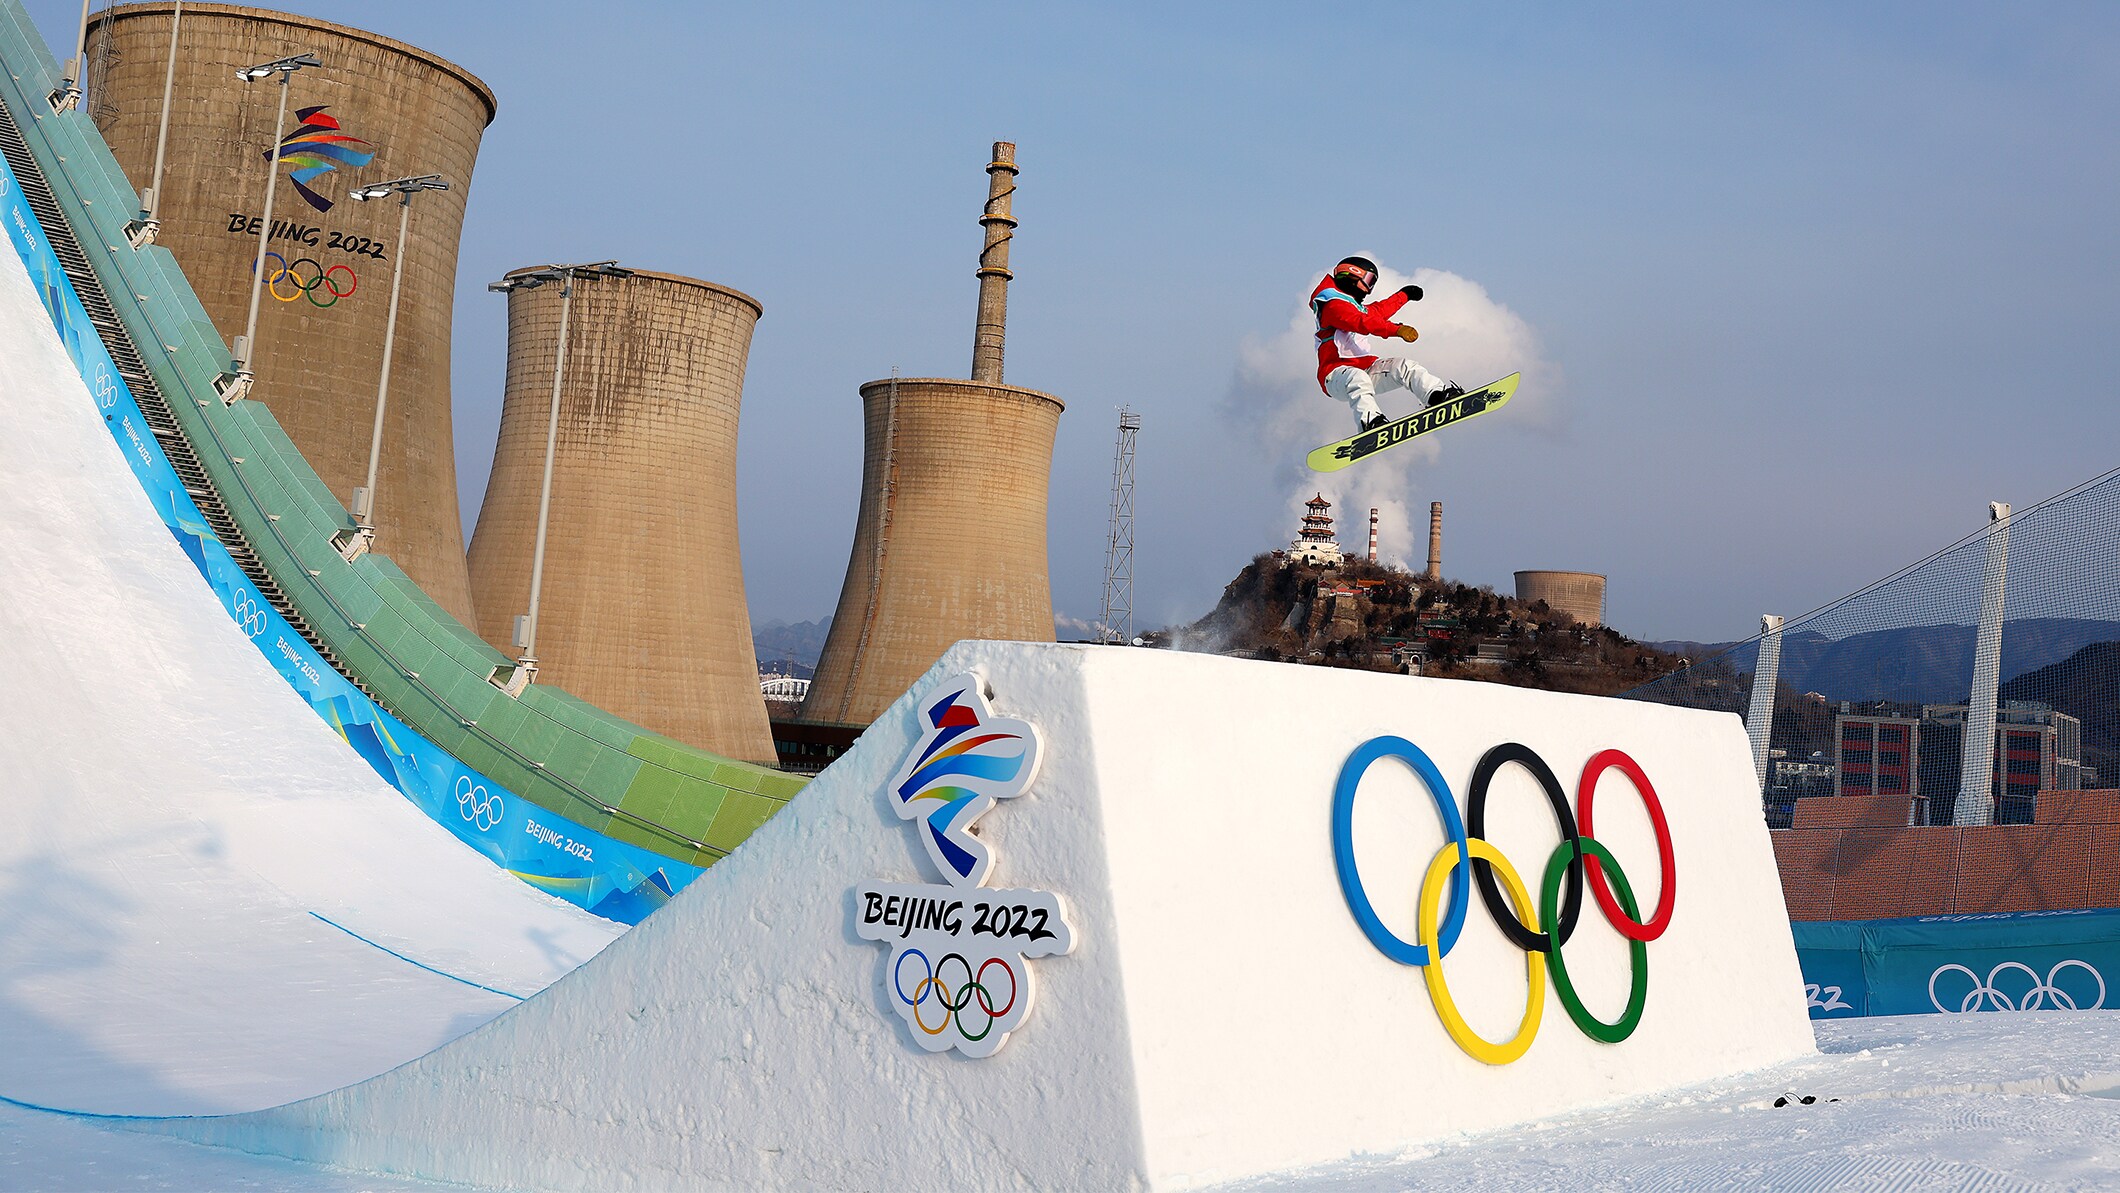 Reira Iwabuchi of Team Japan performs a trick during the Women's Snowboard Big Air final